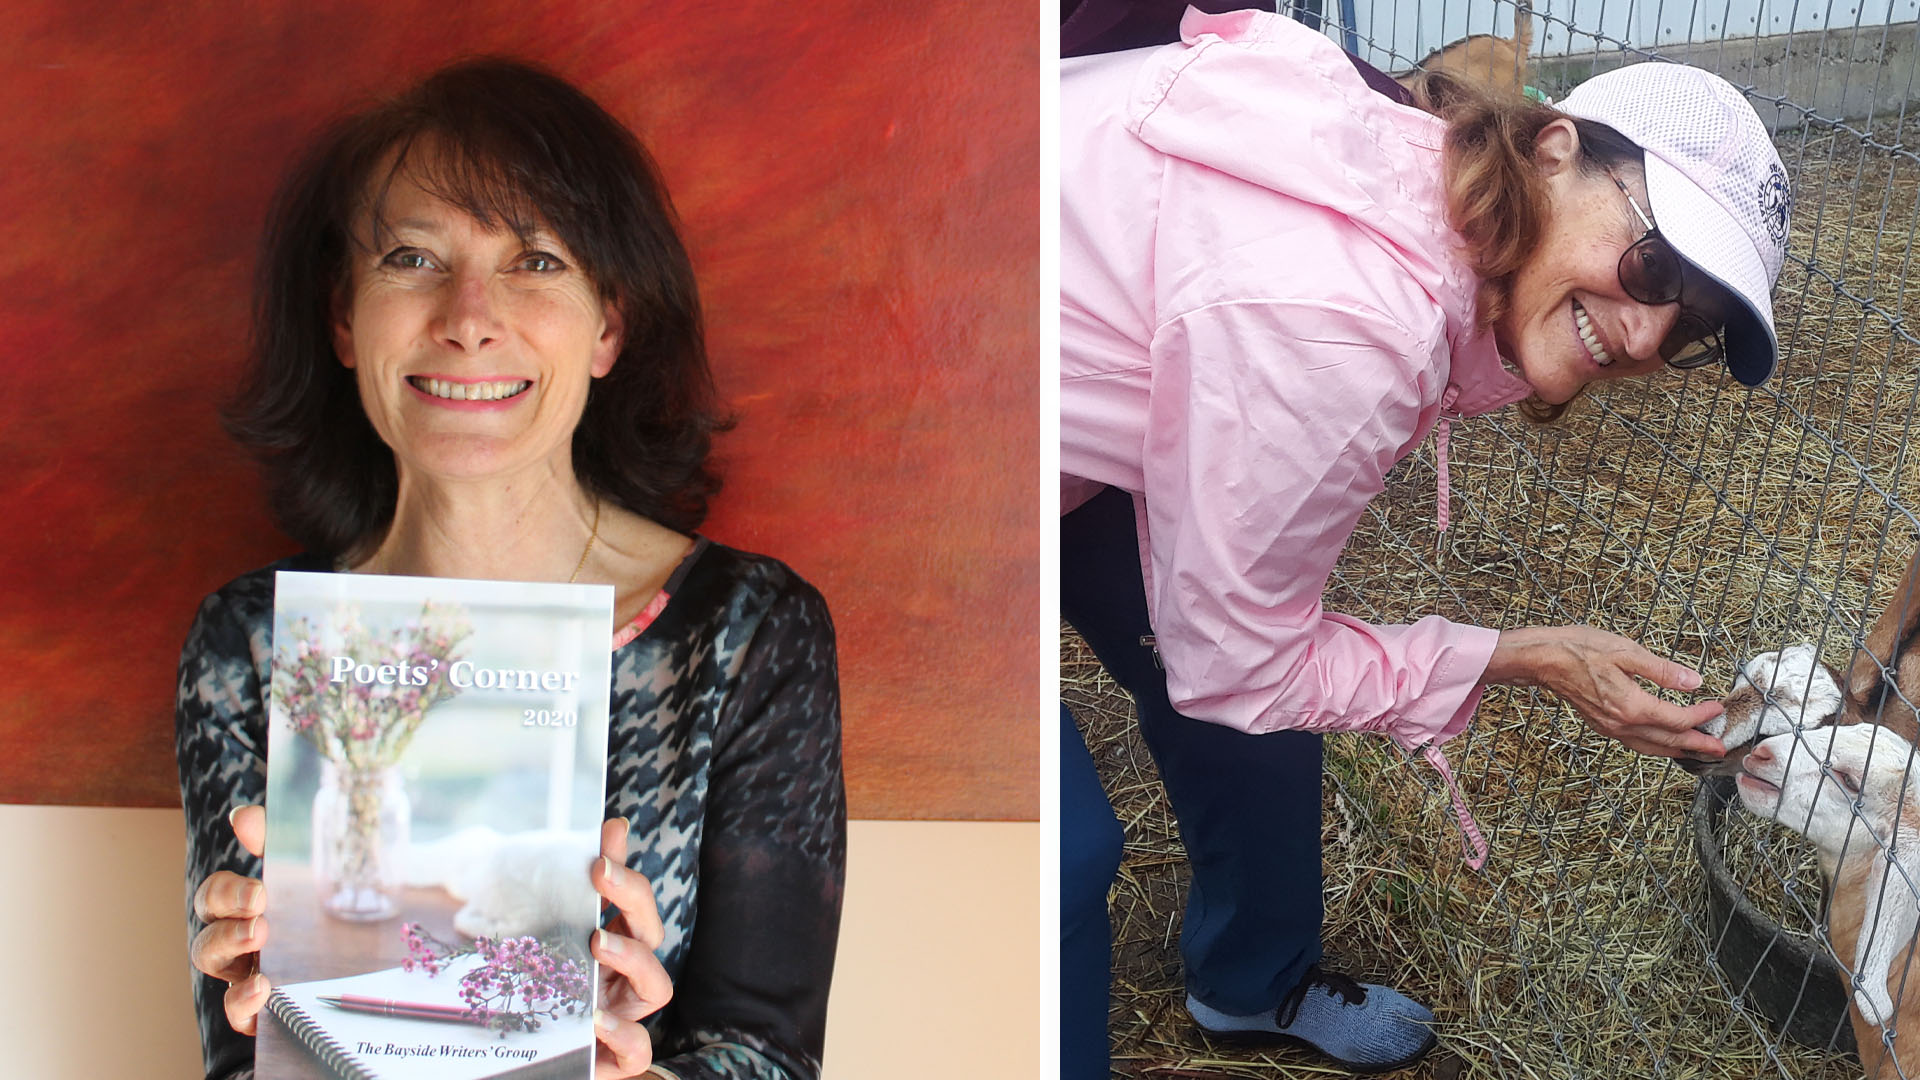 Two photographs presented side by side. On the left, a smiling woman with long brown hair holding a book entitled "Poets Corner". This is Rose Lumbaca Crane. On the right, a woman wearing a waterproof jacket and baseball cap, smiling towards the camera and bent down to feed two small goats through a wire fence. This is Bhikshuni Weisbrot.